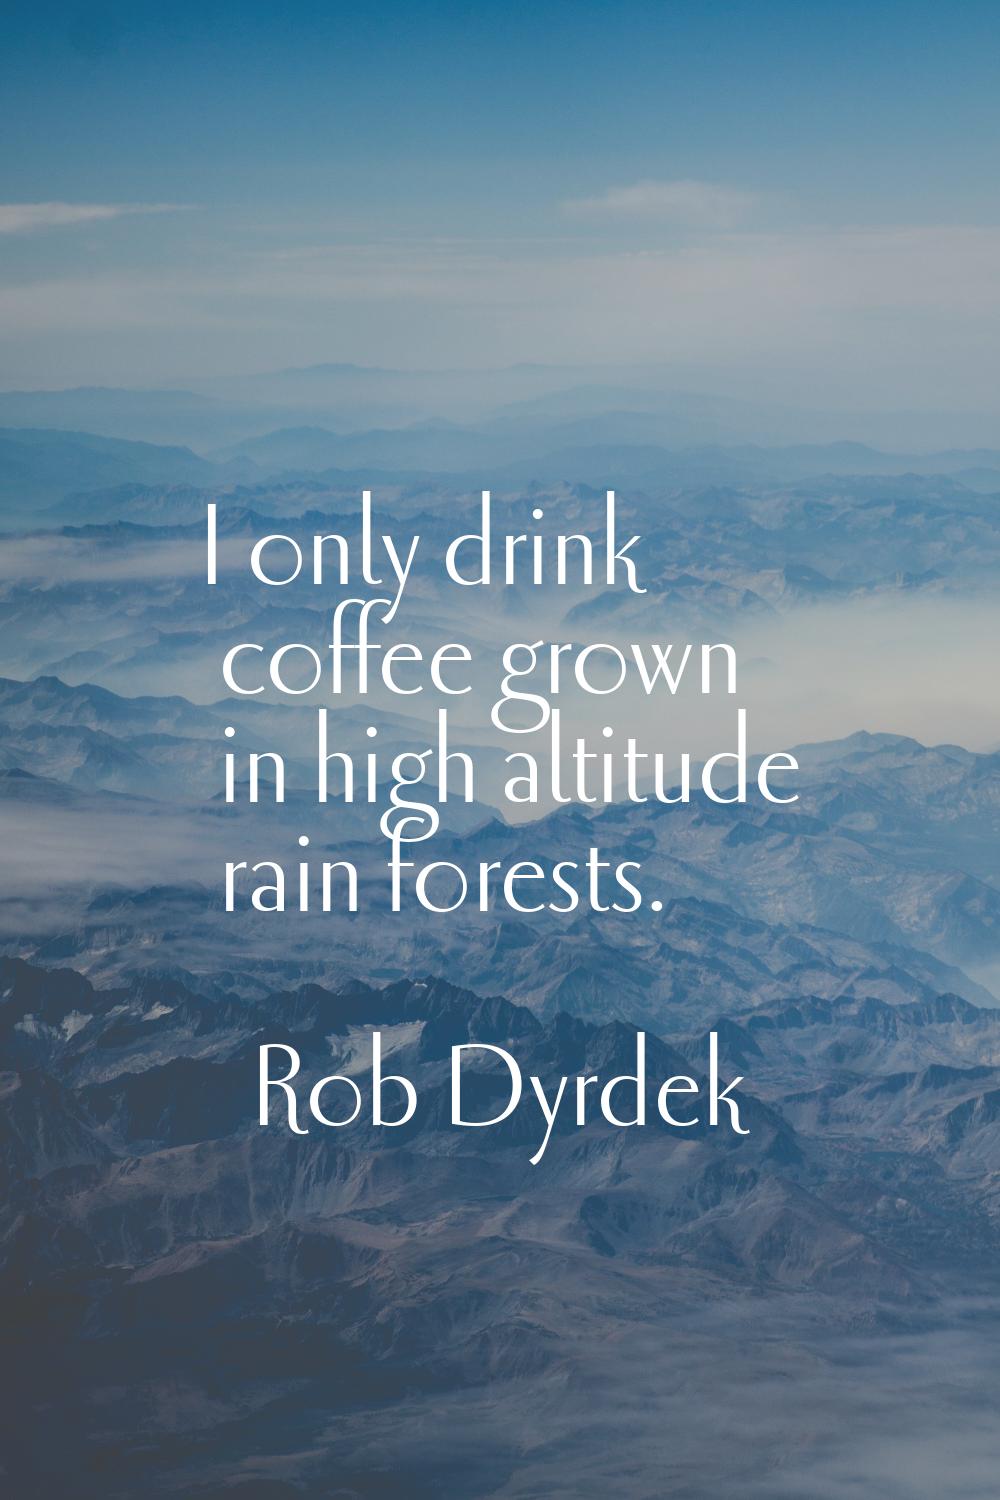 I only drink coffee grown in high altitude rain forests.